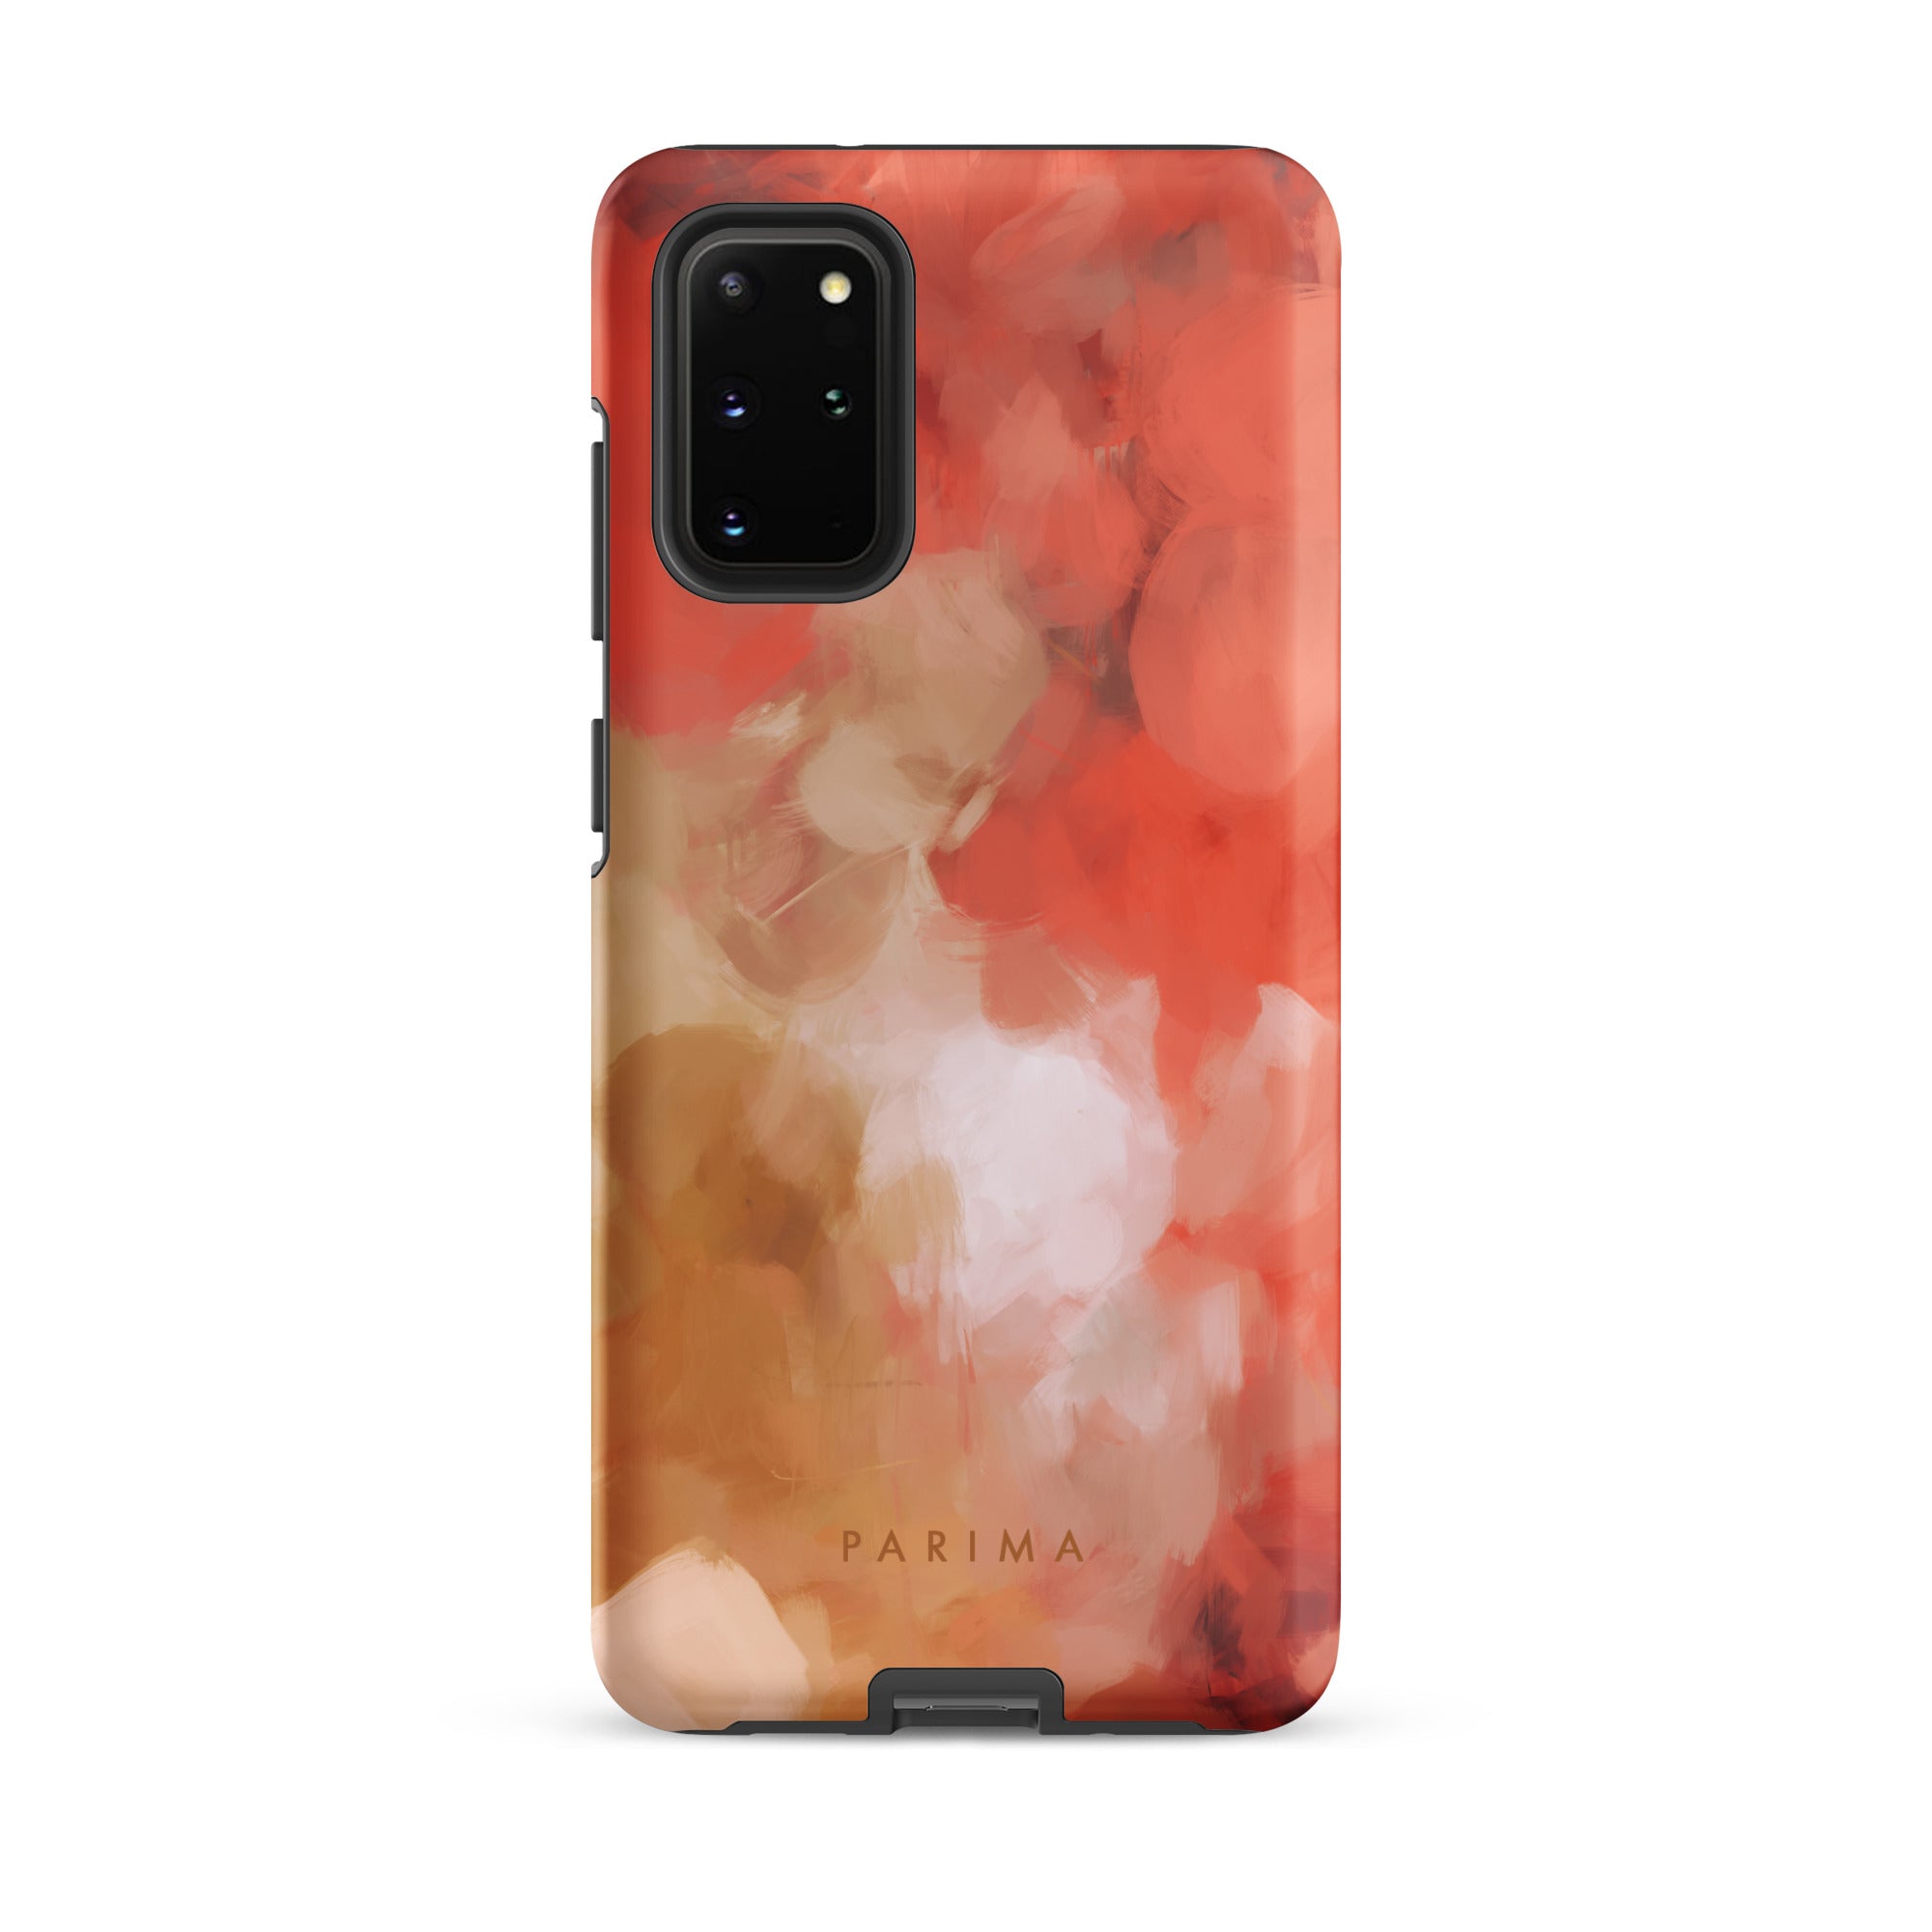 Begonia, pink and gold abstract art on Samsung Galaxy S20 plus tough case by Parima Studio